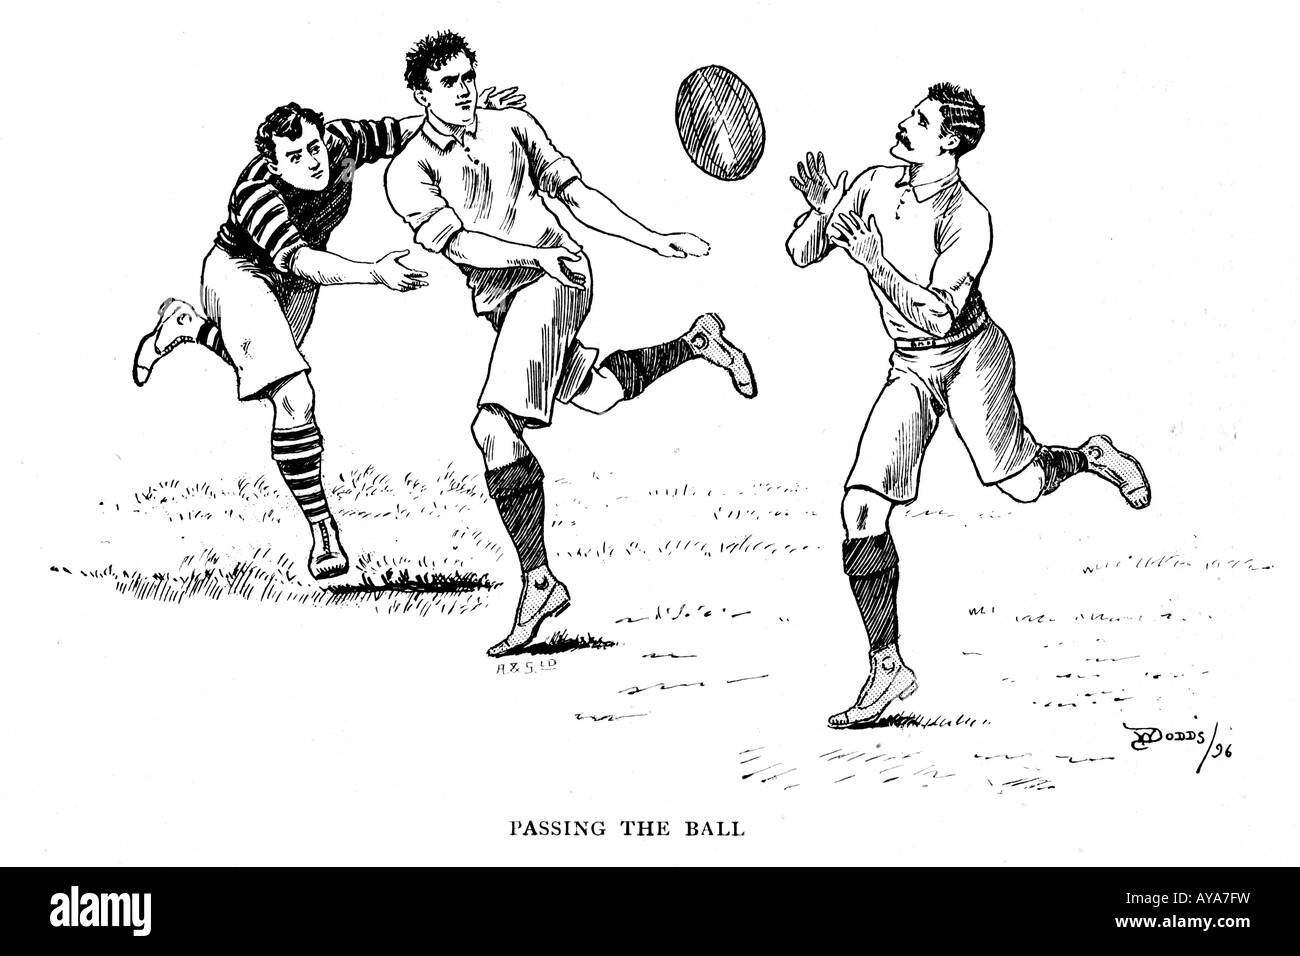 Passing The Ball 1896 illustration by Dodds of a game situation from the book by B Fletcher Robinson on rugby football Stock Photo